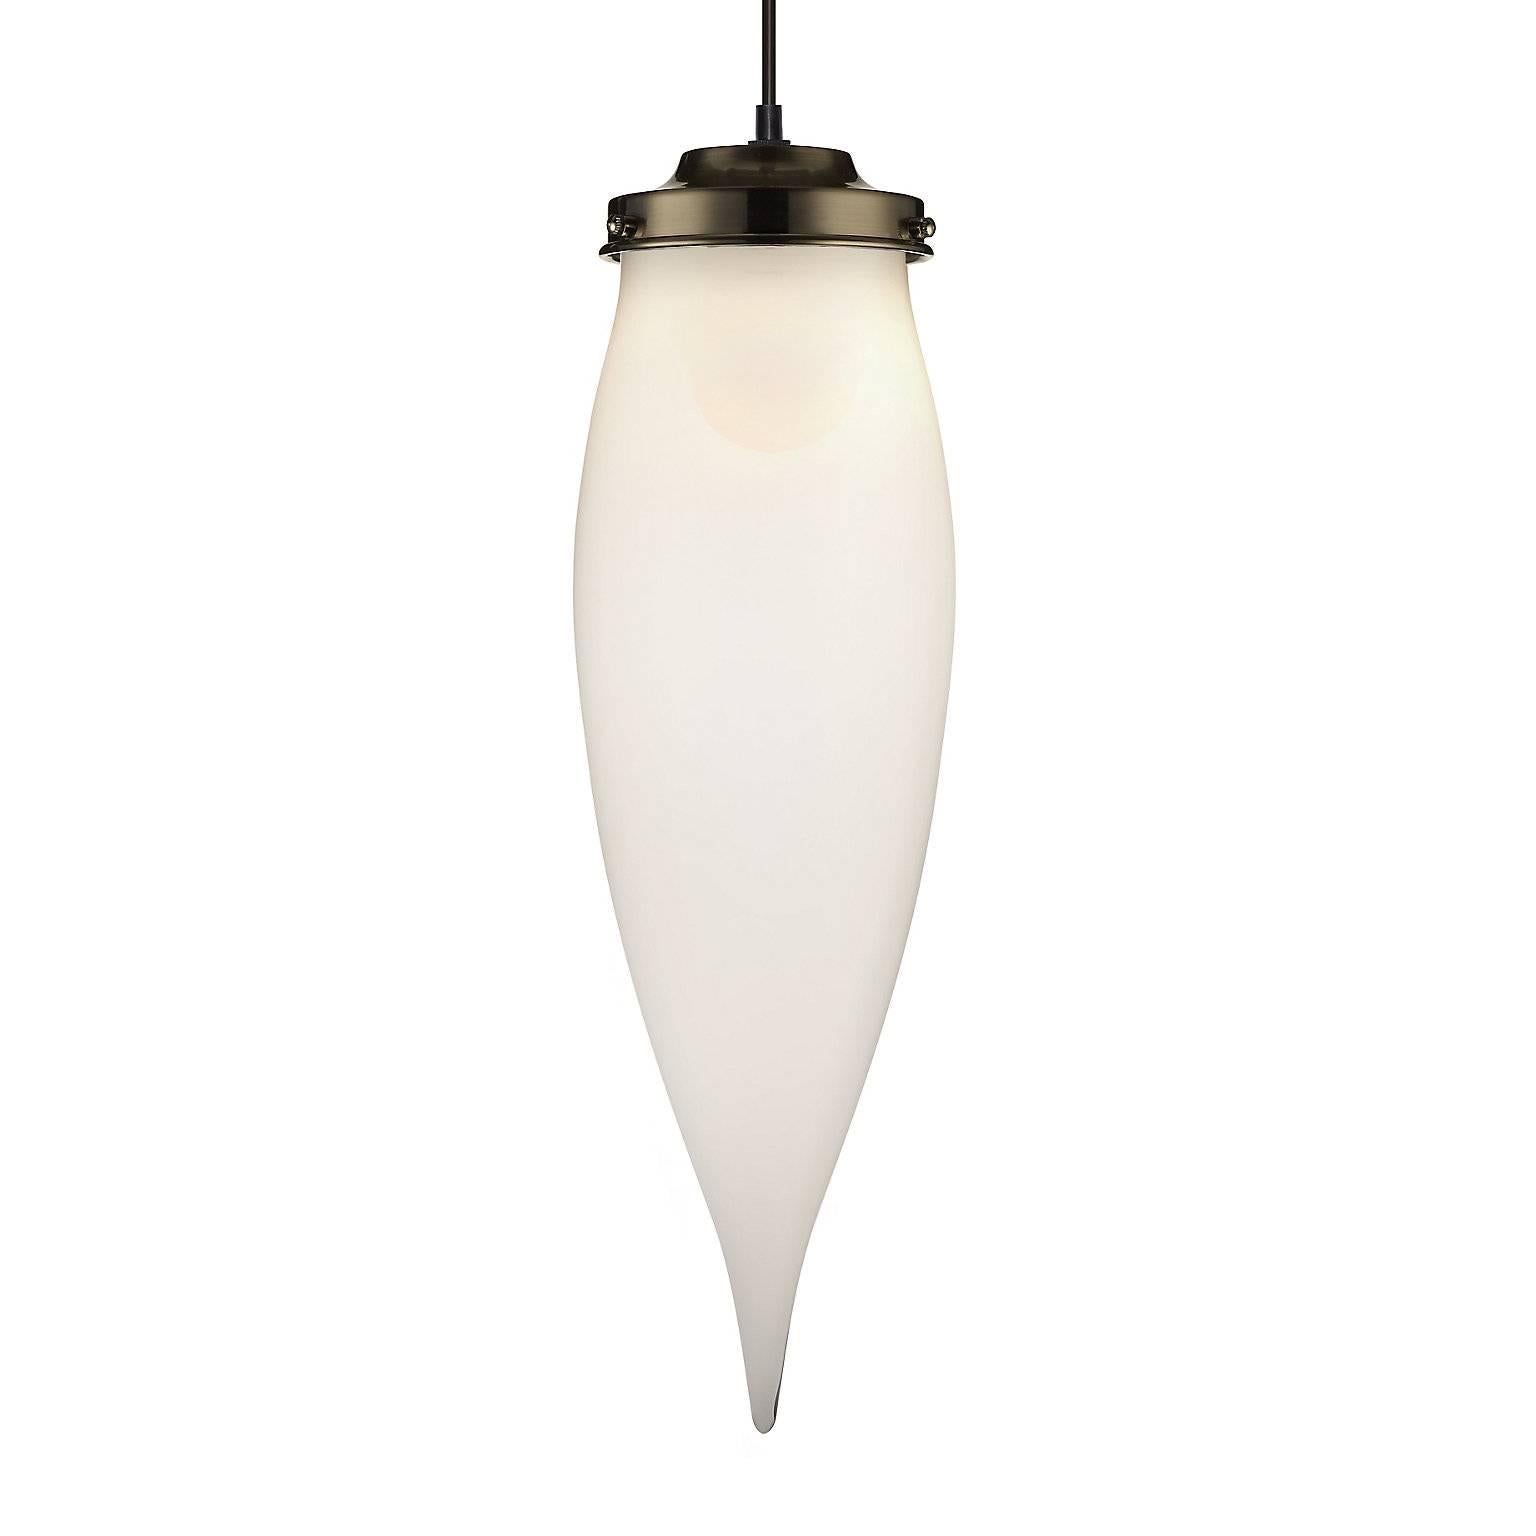 Pointelle Petite Optique Handblown Modern Glass Pendant Light, Made in the USA In New Condition For Sale In Beacon, NY